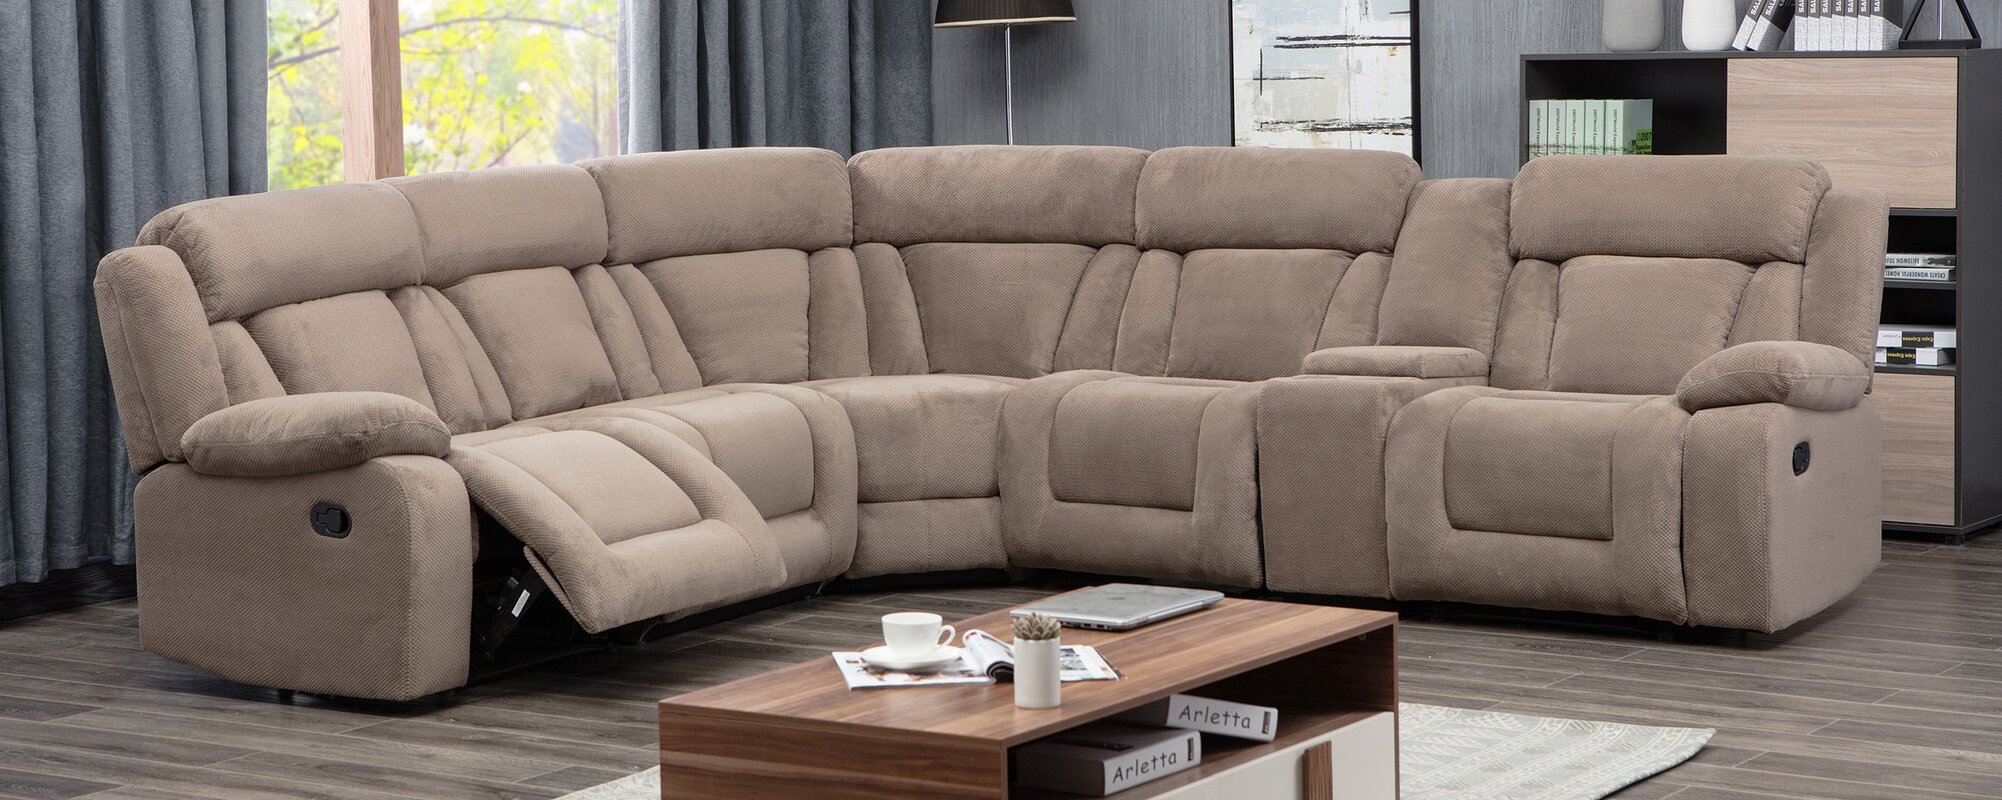 Herald Square Reclining Sectional Sofa